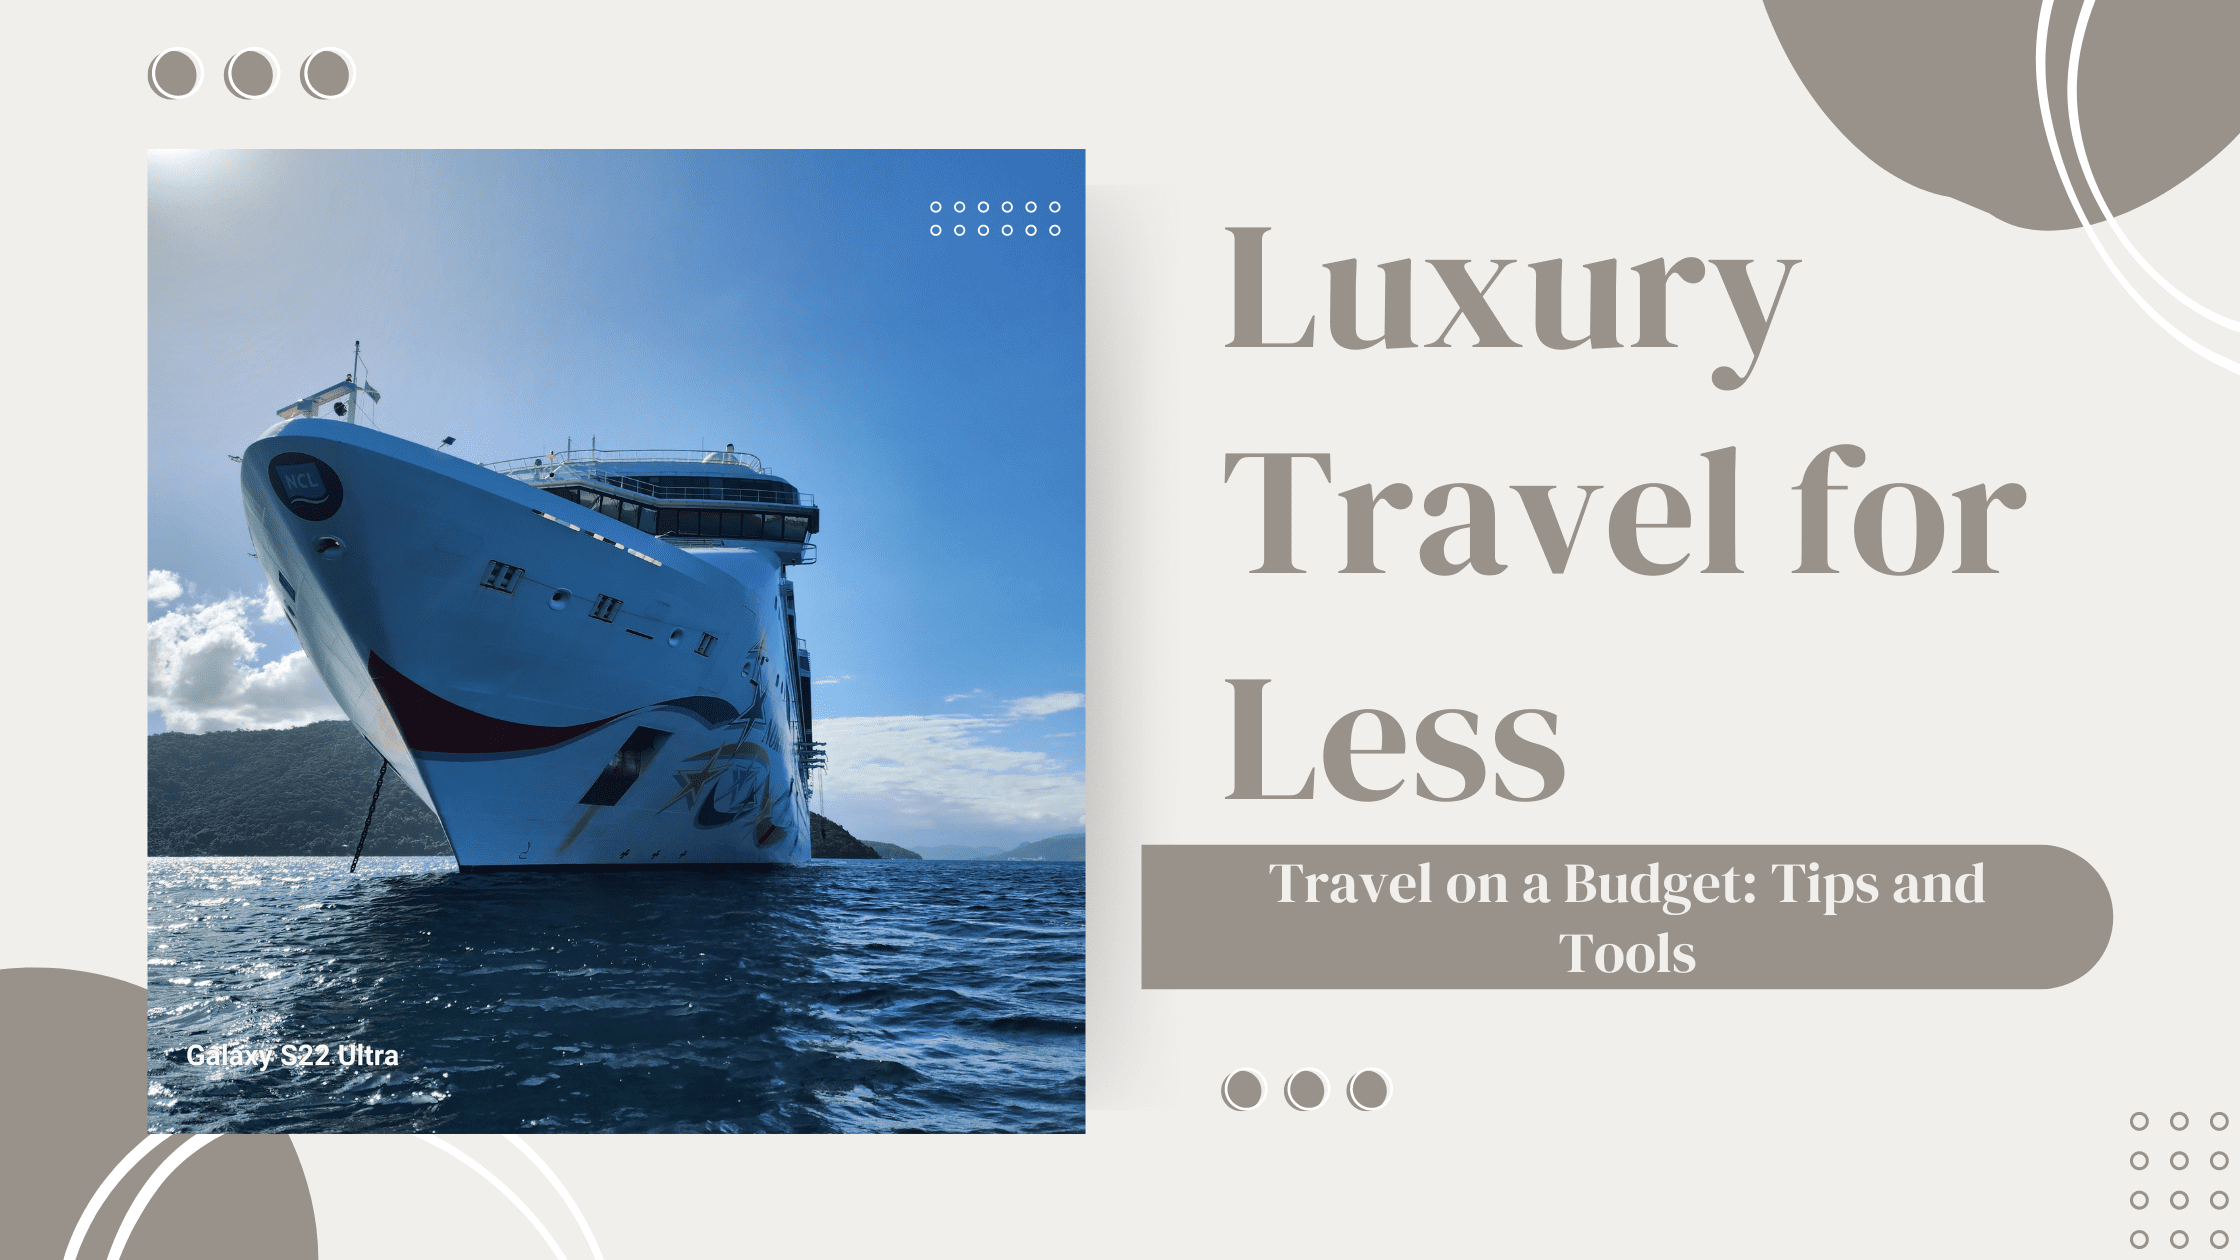 Lux Travel for Less